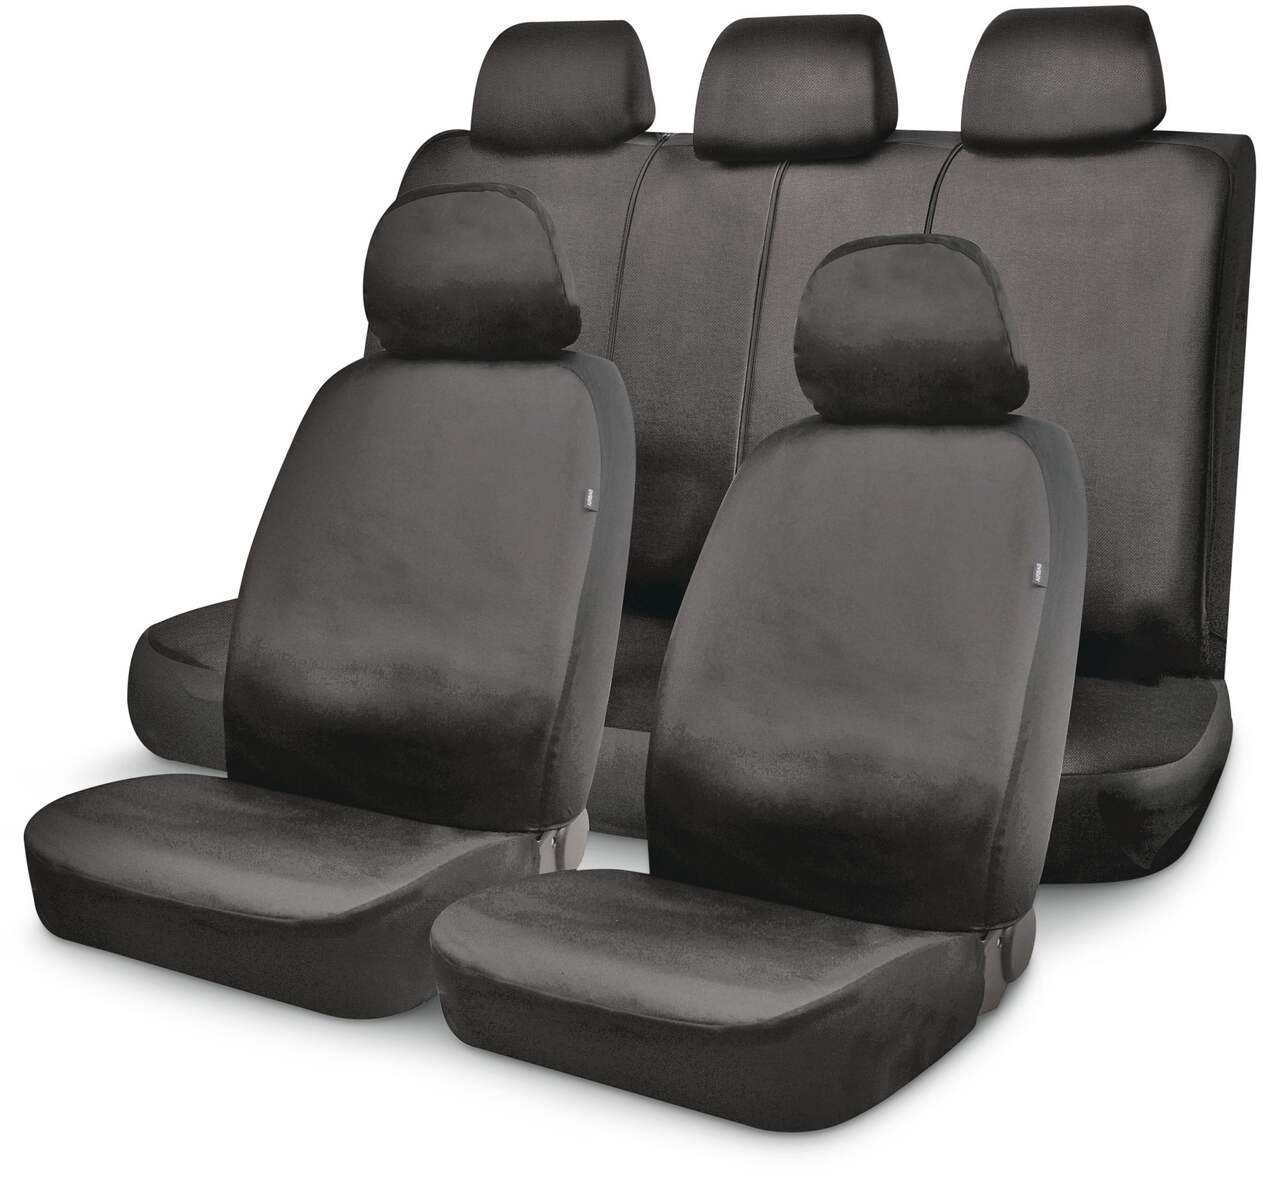 AutoTrends Truck Heavy Duty Seat & Headrest Cover Set for Back Bench Seat,  Black